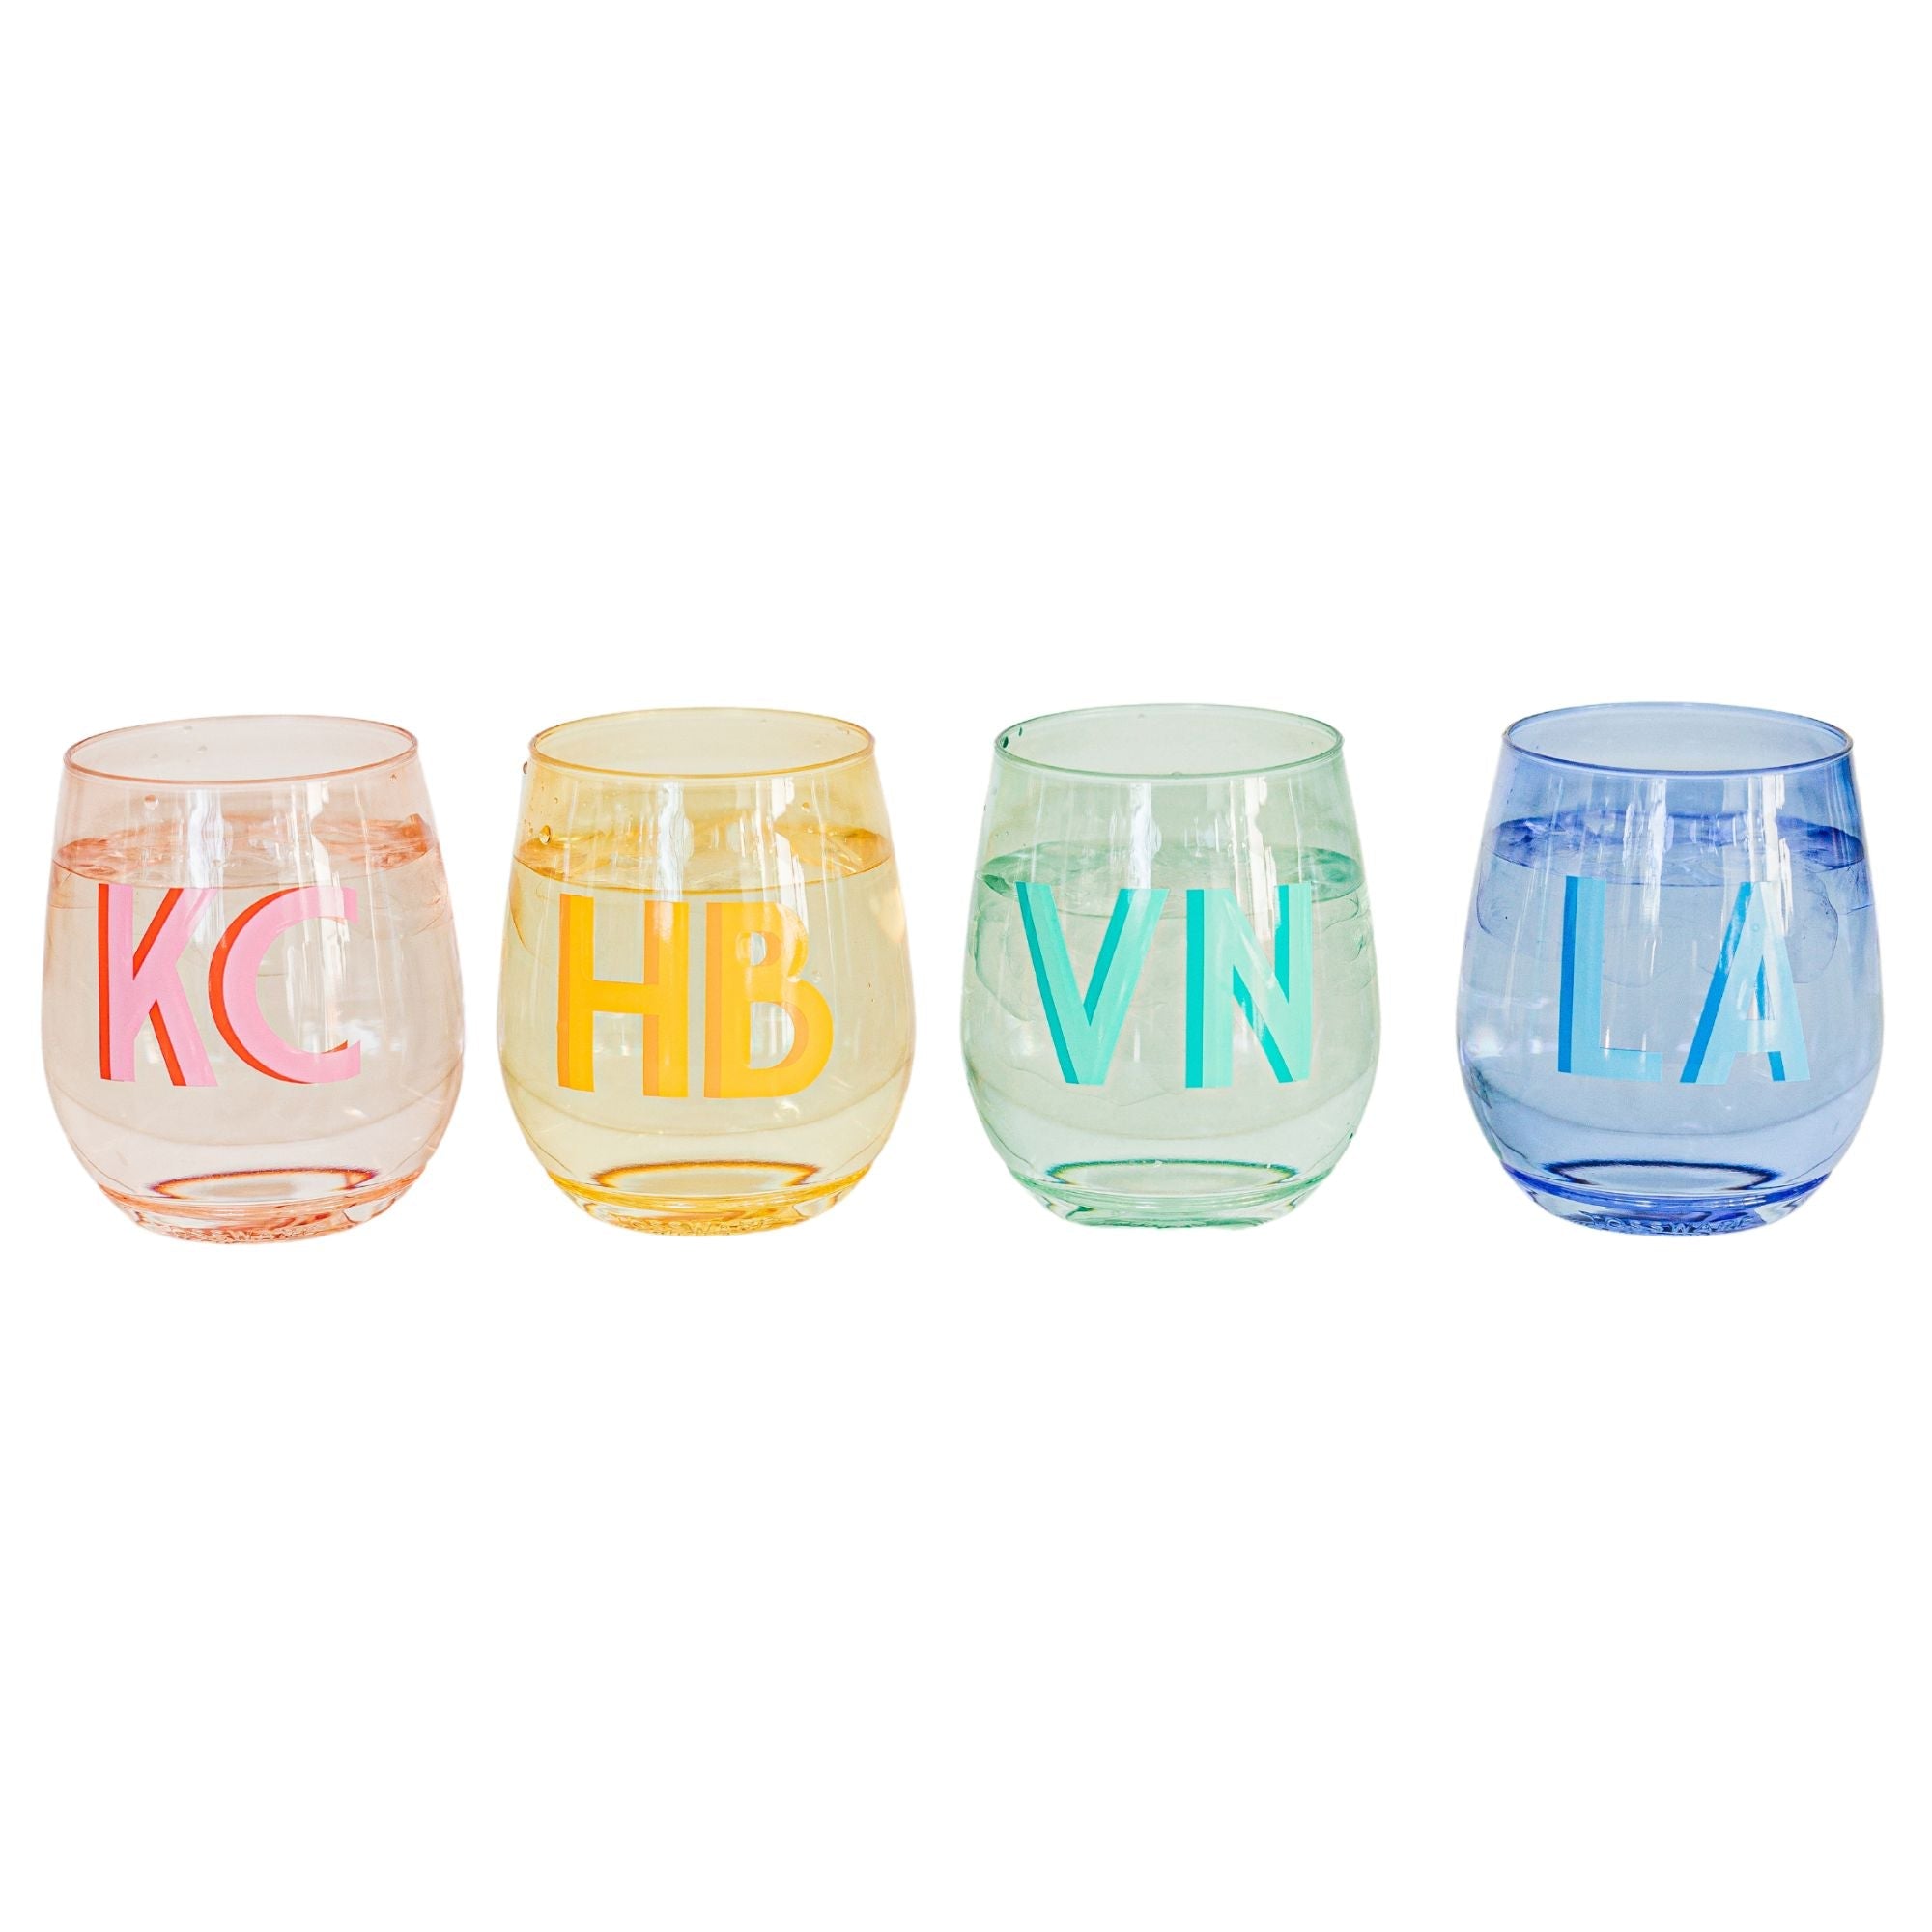 A pink, yellow, green, and a blue wine glass are personalized with different colored monograms.